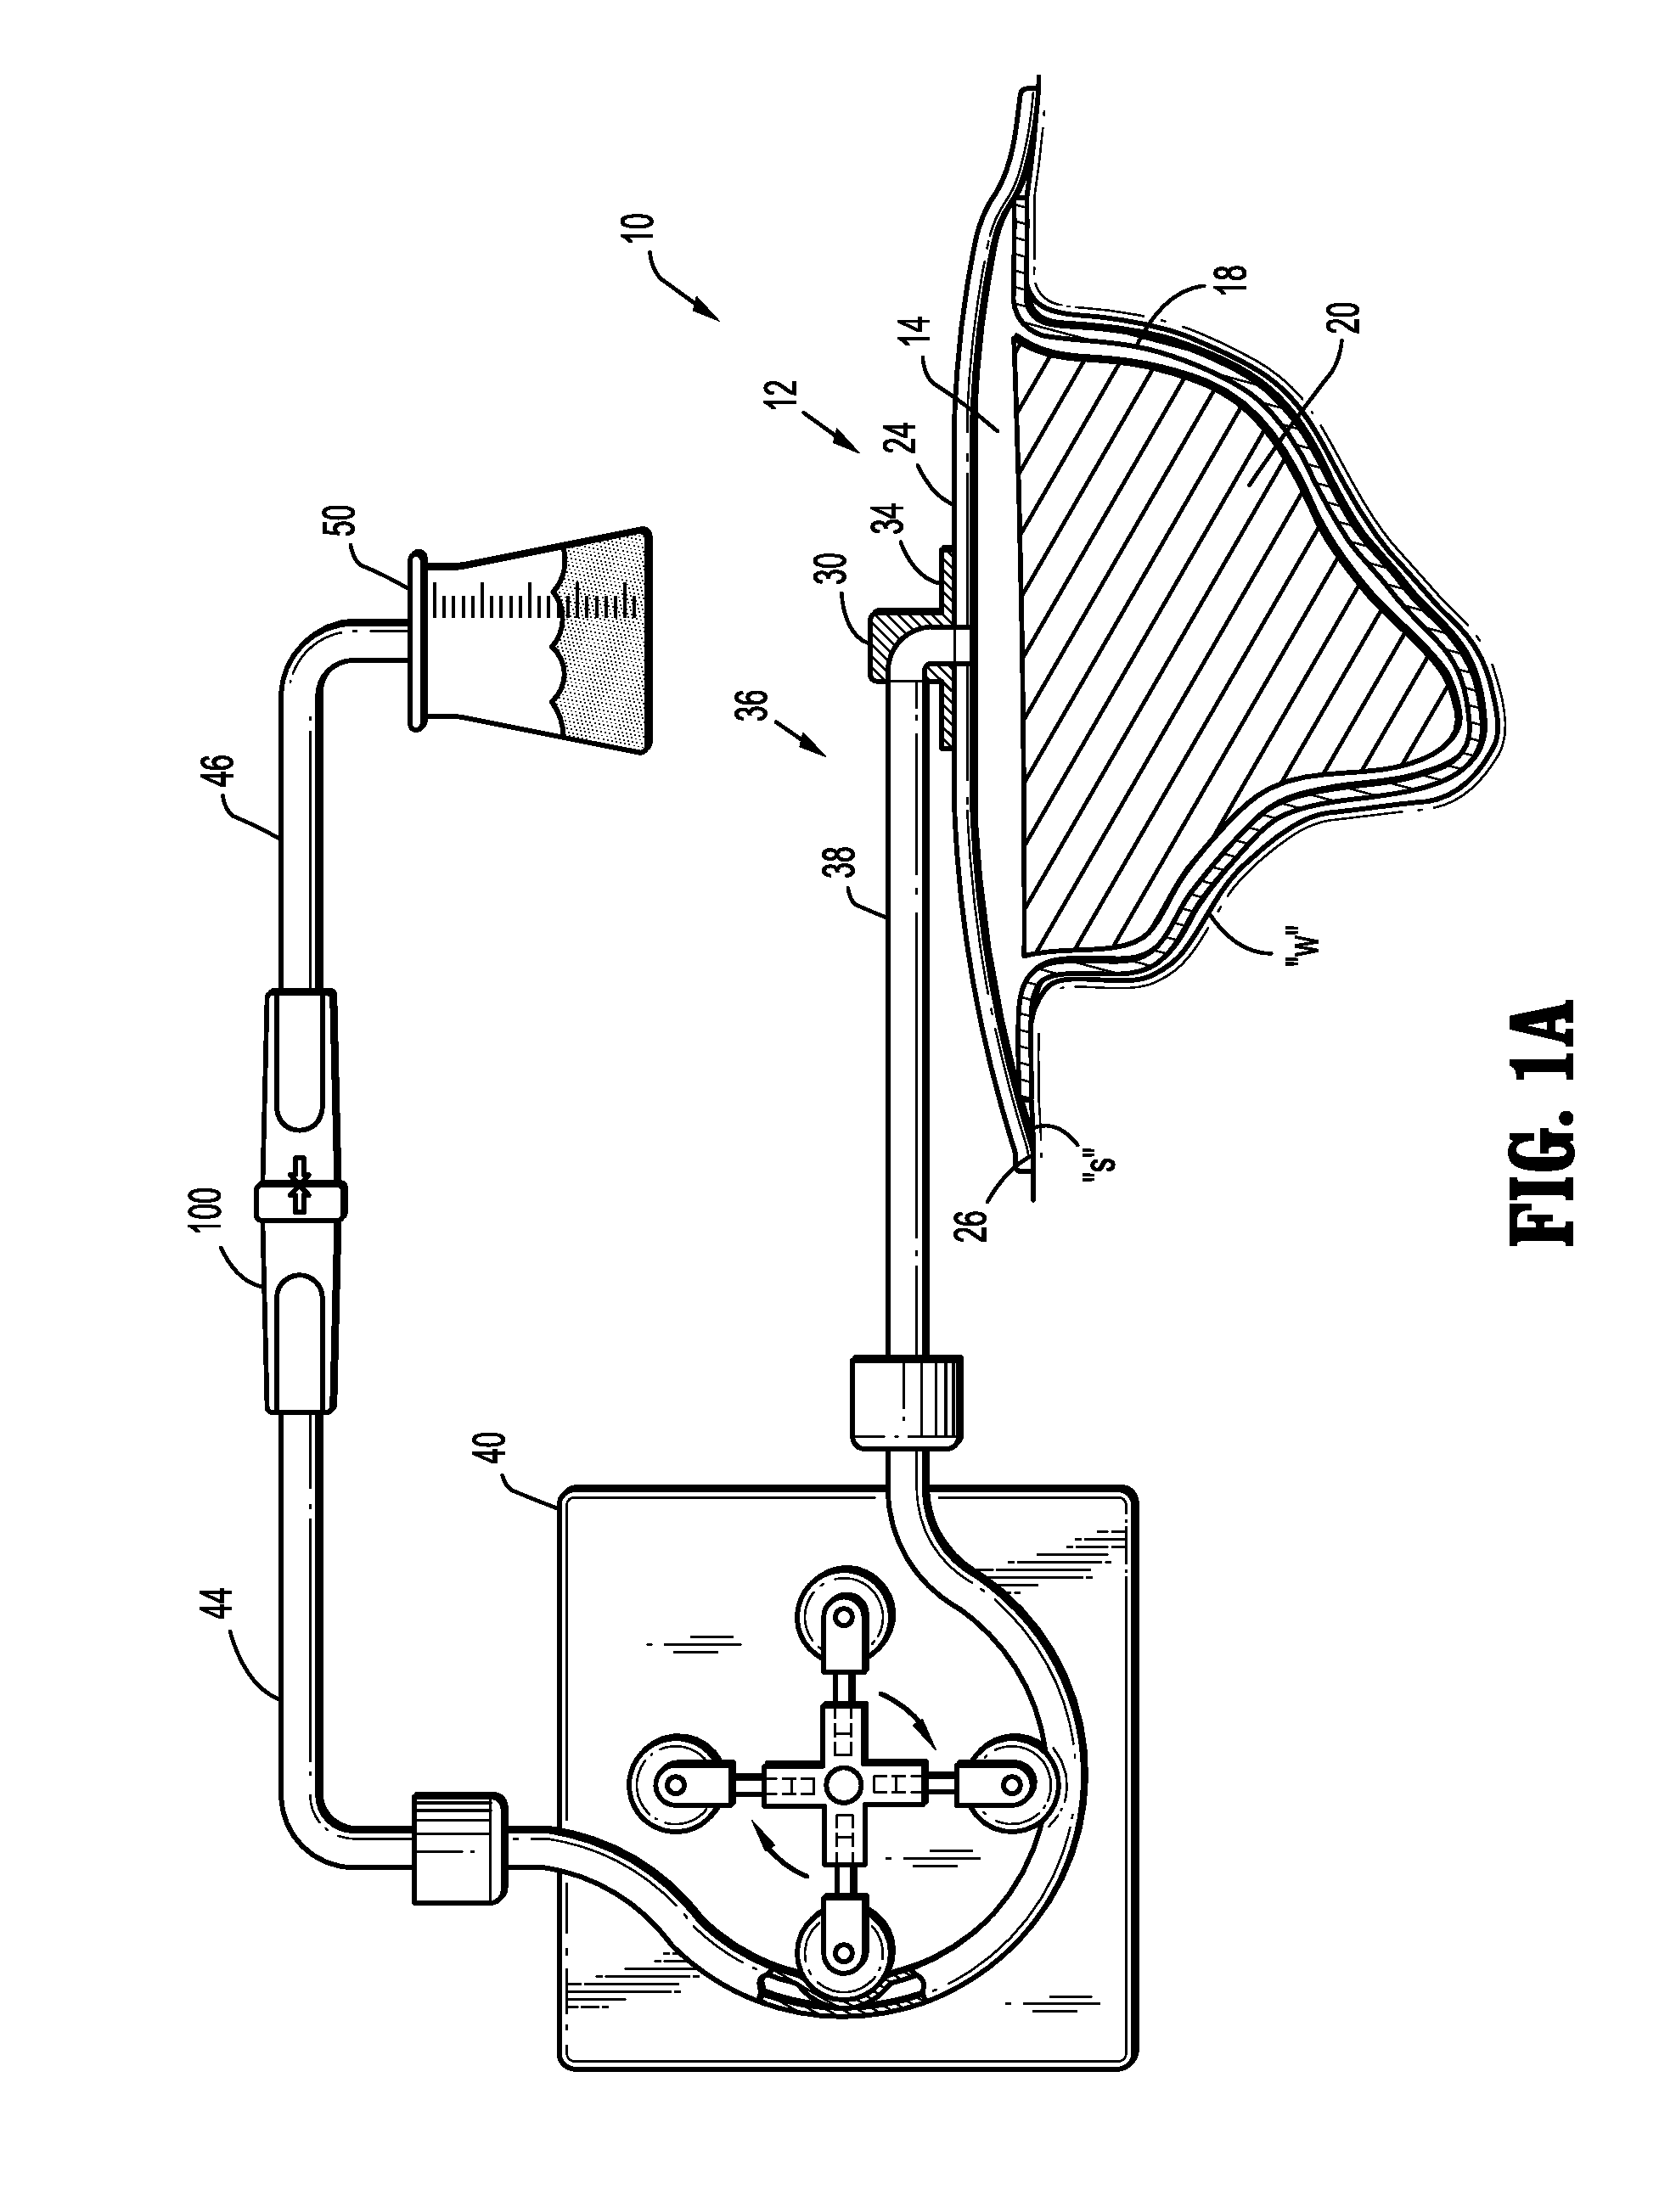 Negative Pressure Wound Therapy Apparatus Including a Fluid Line Coupling